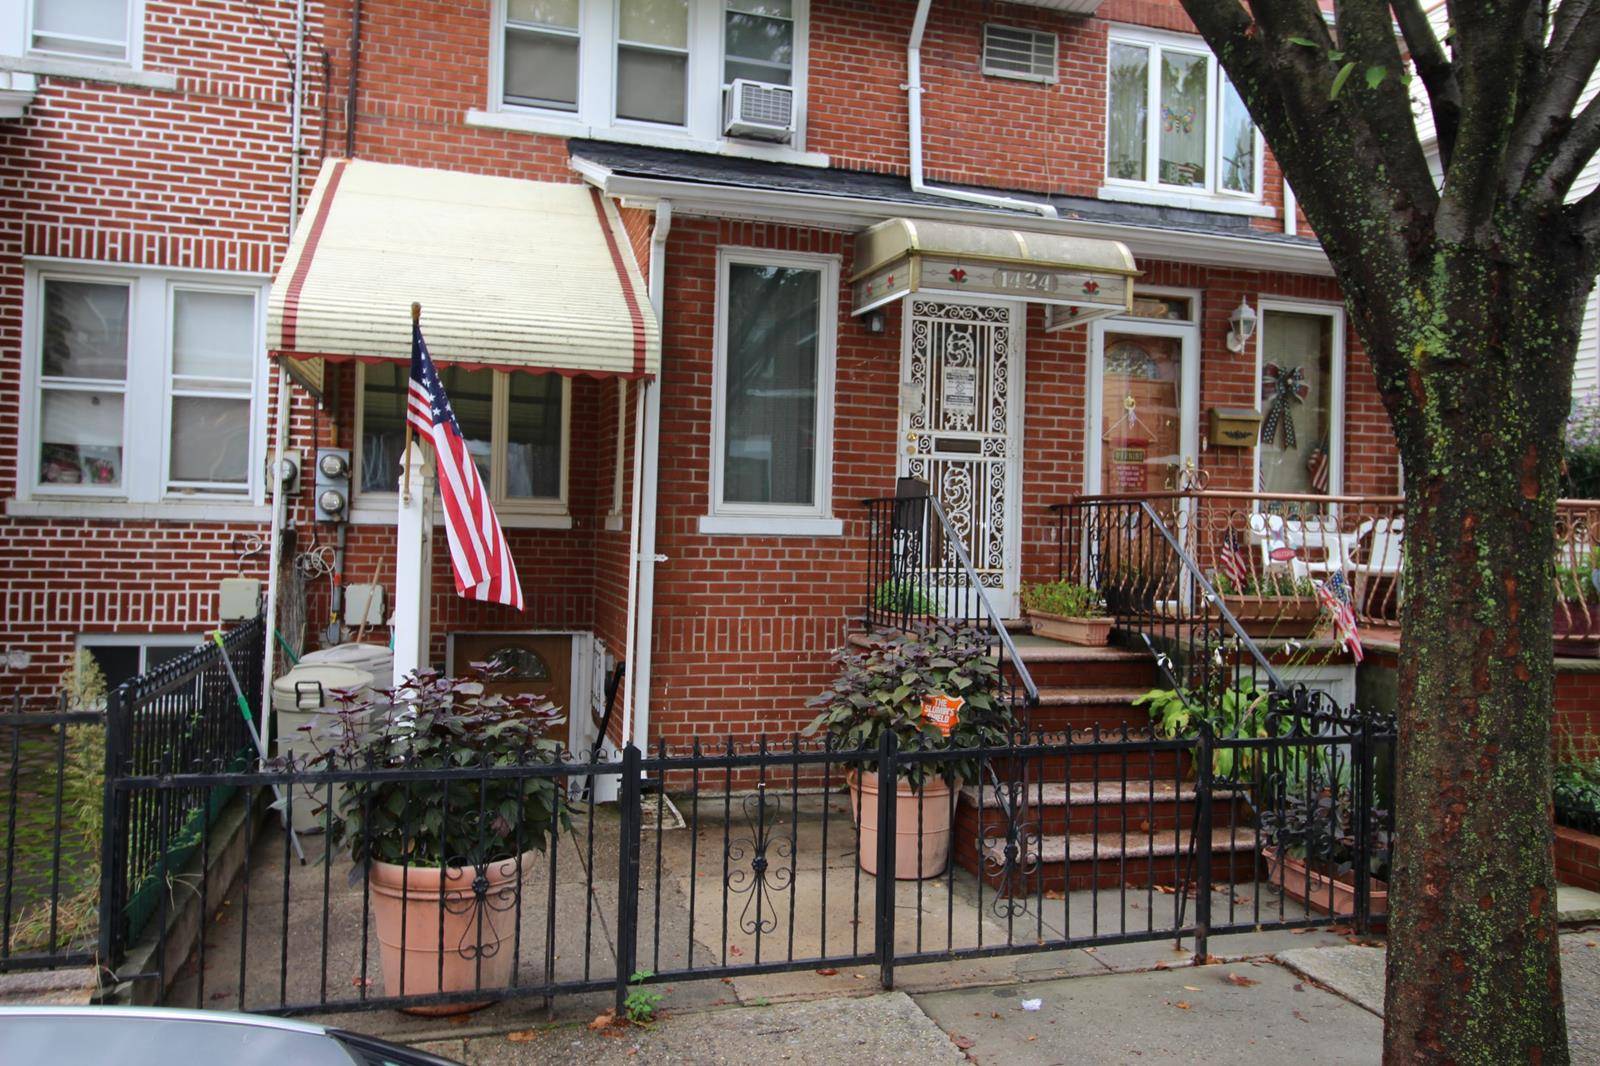 ACCEPTED OFFER. Attached brick home on the Dyker Heights Bensonhurst border.